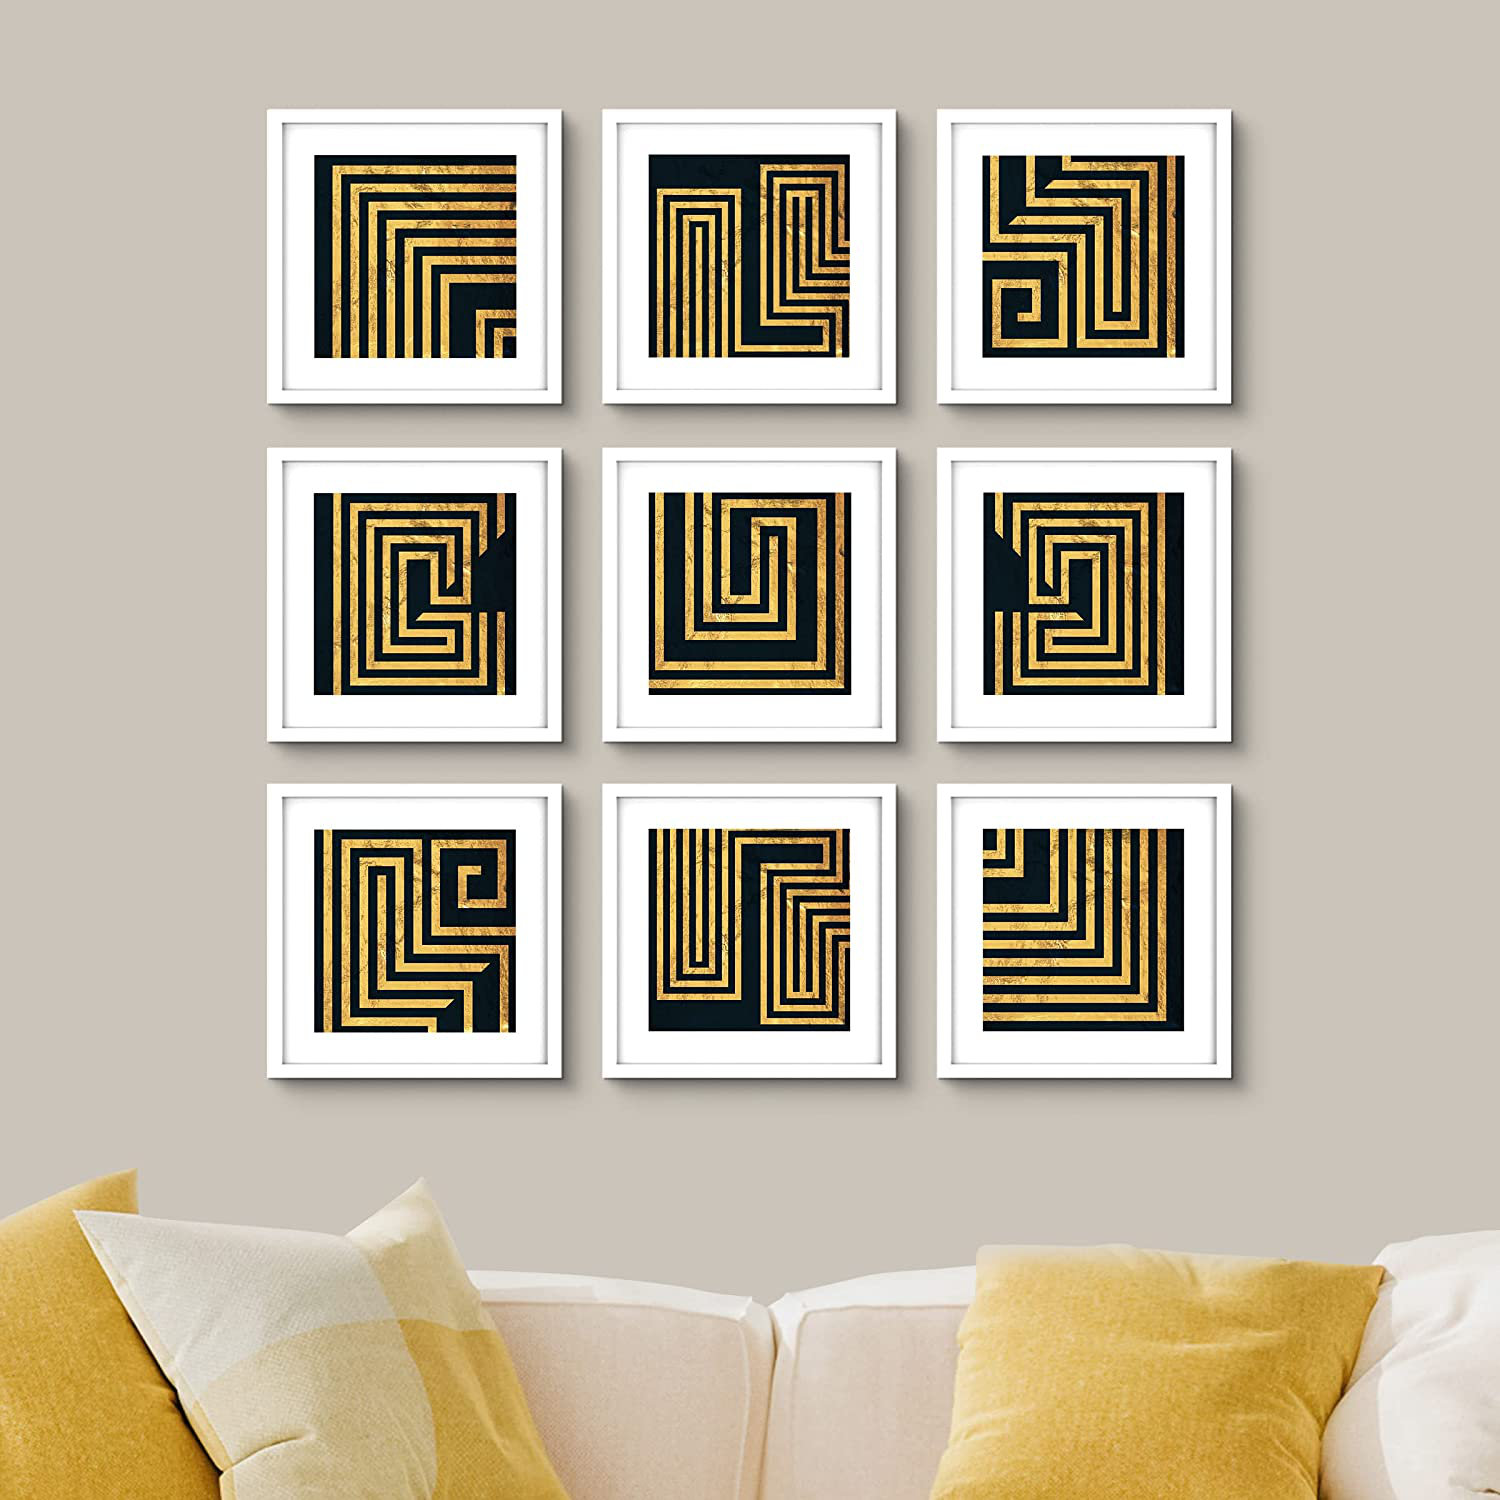 SIGNLEADER Gold Geometric Shapes / | Digital Plastic Pieces Dramatic Wayfair Fun Acrylic Framed Contemporary Puzzle Print Modern Maze Line On Abstract 9 Art